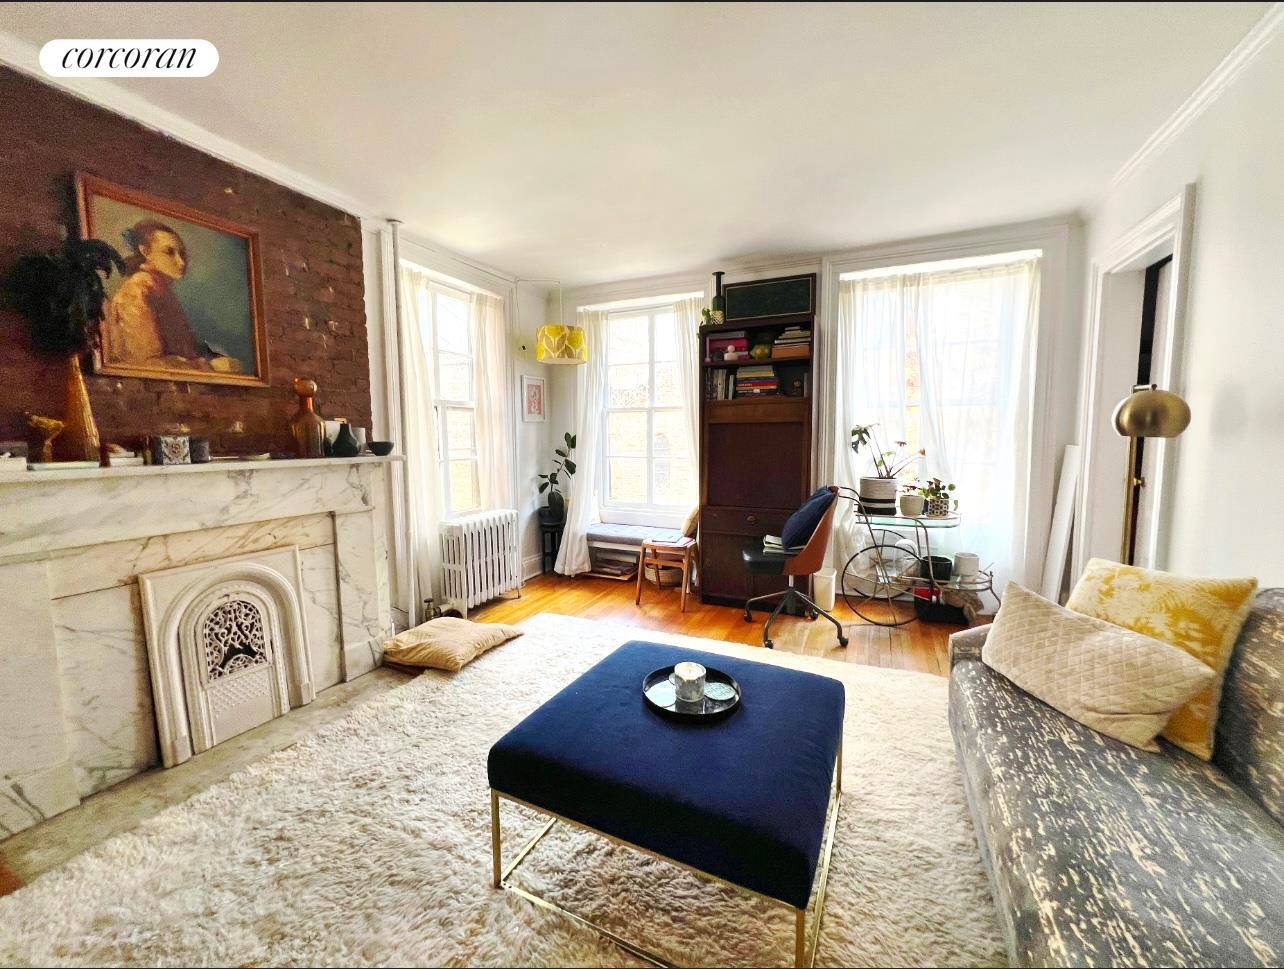 Welcome to your own Parisian styled Apartment.